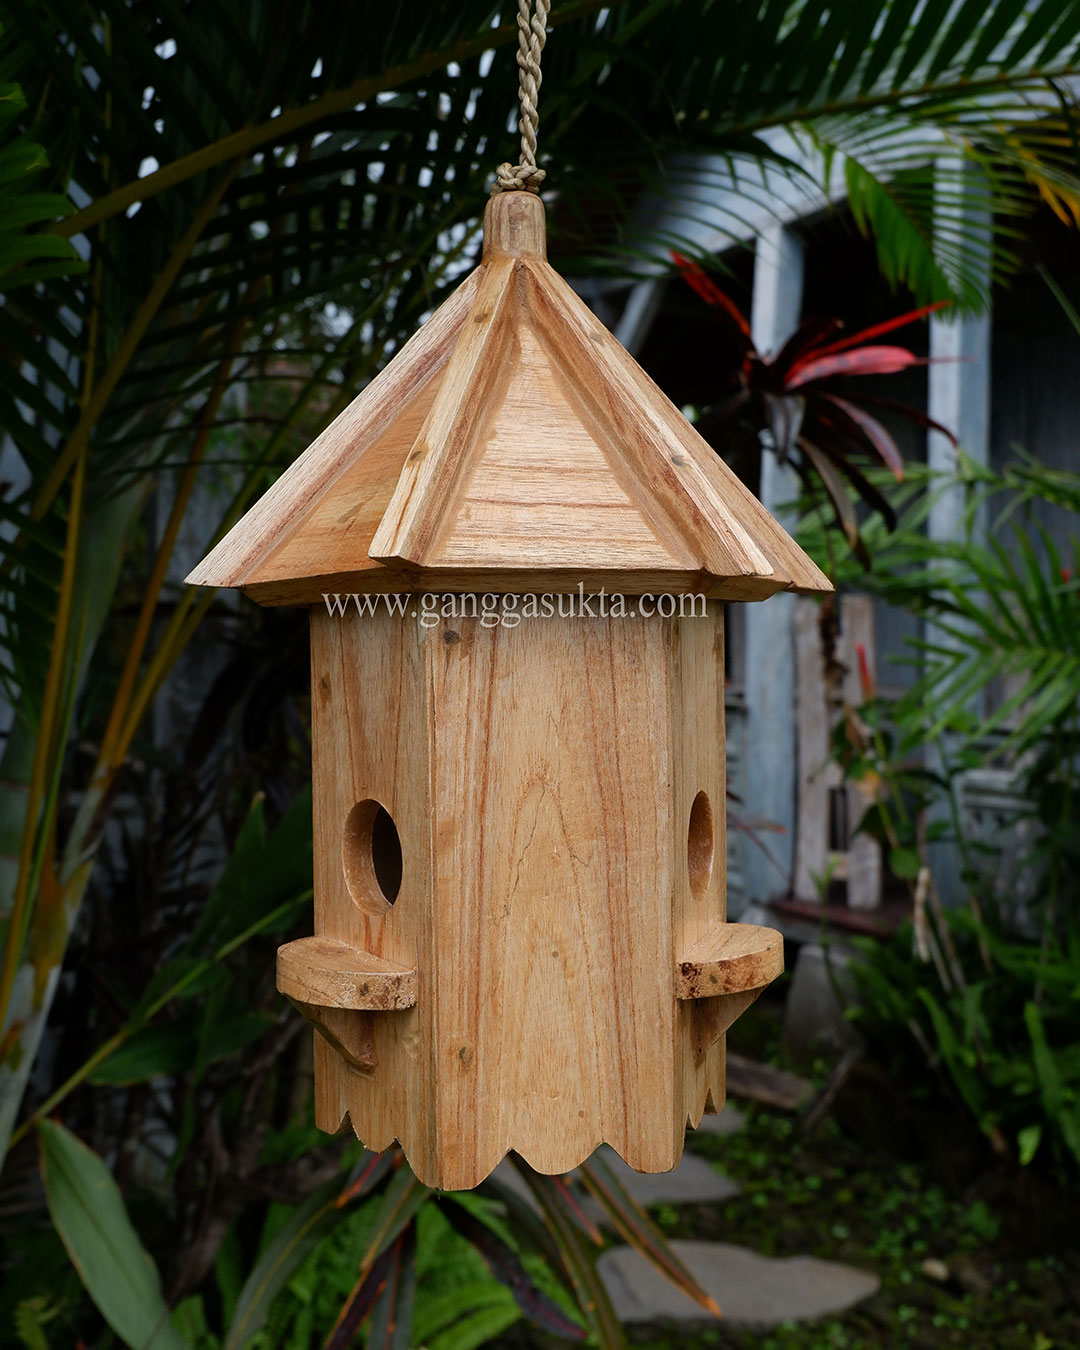 Bird-House-Box-Natural-Color-Circus-Theme-for-Hanging-Outdoor-Decoration-Garden-Balcony-Decoration-High-Quality-Wood